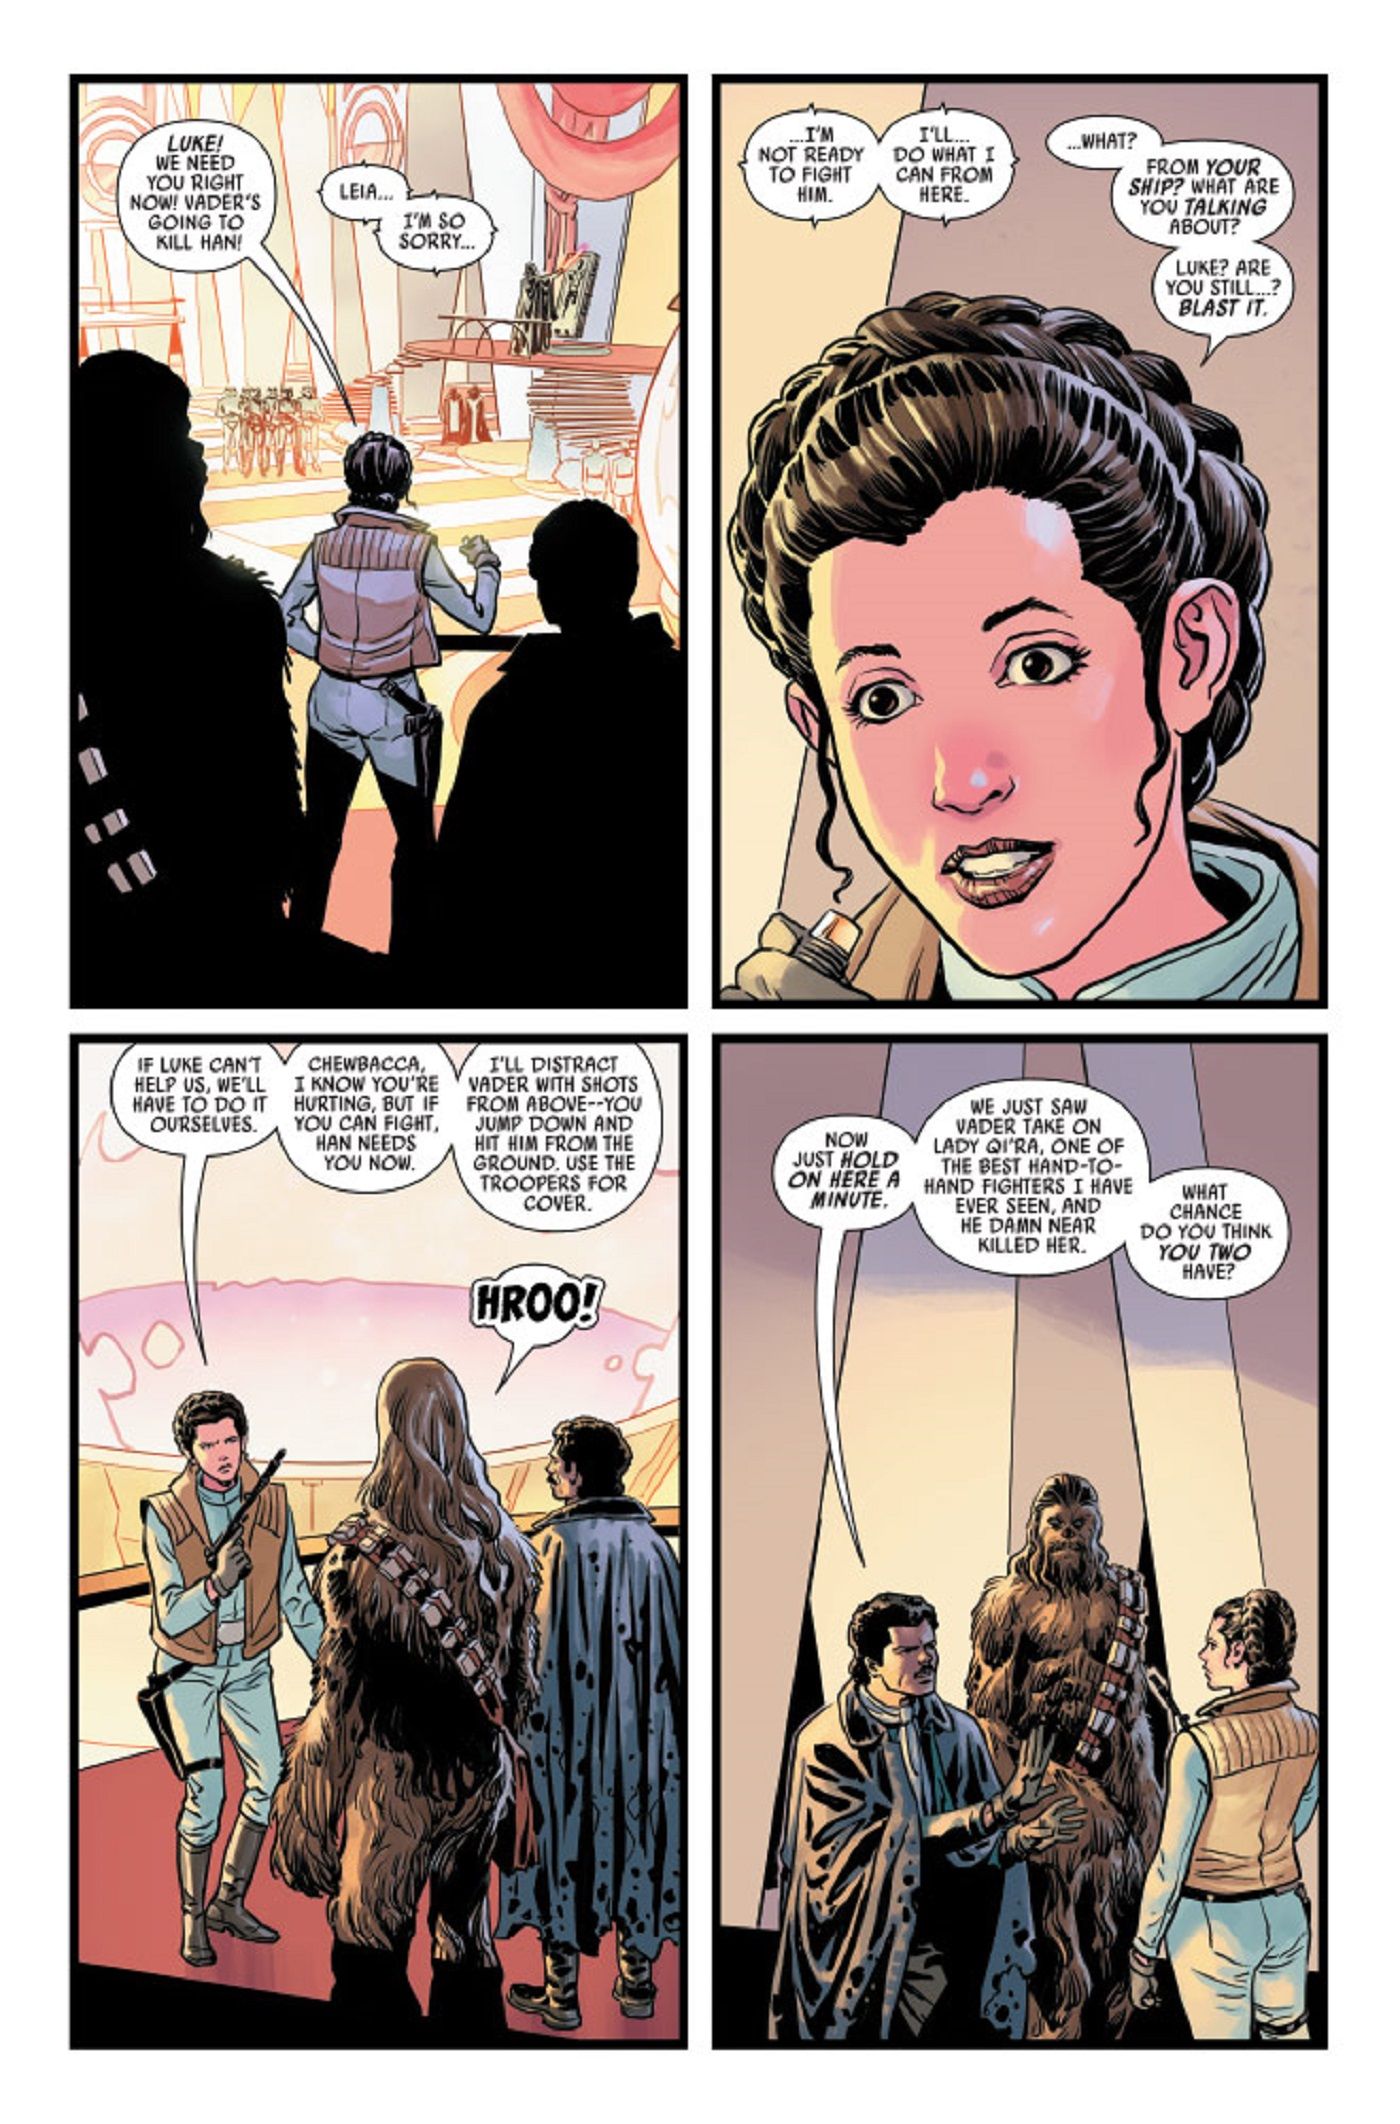 Star Wars War of the Bounty Hunters #4 Page 2